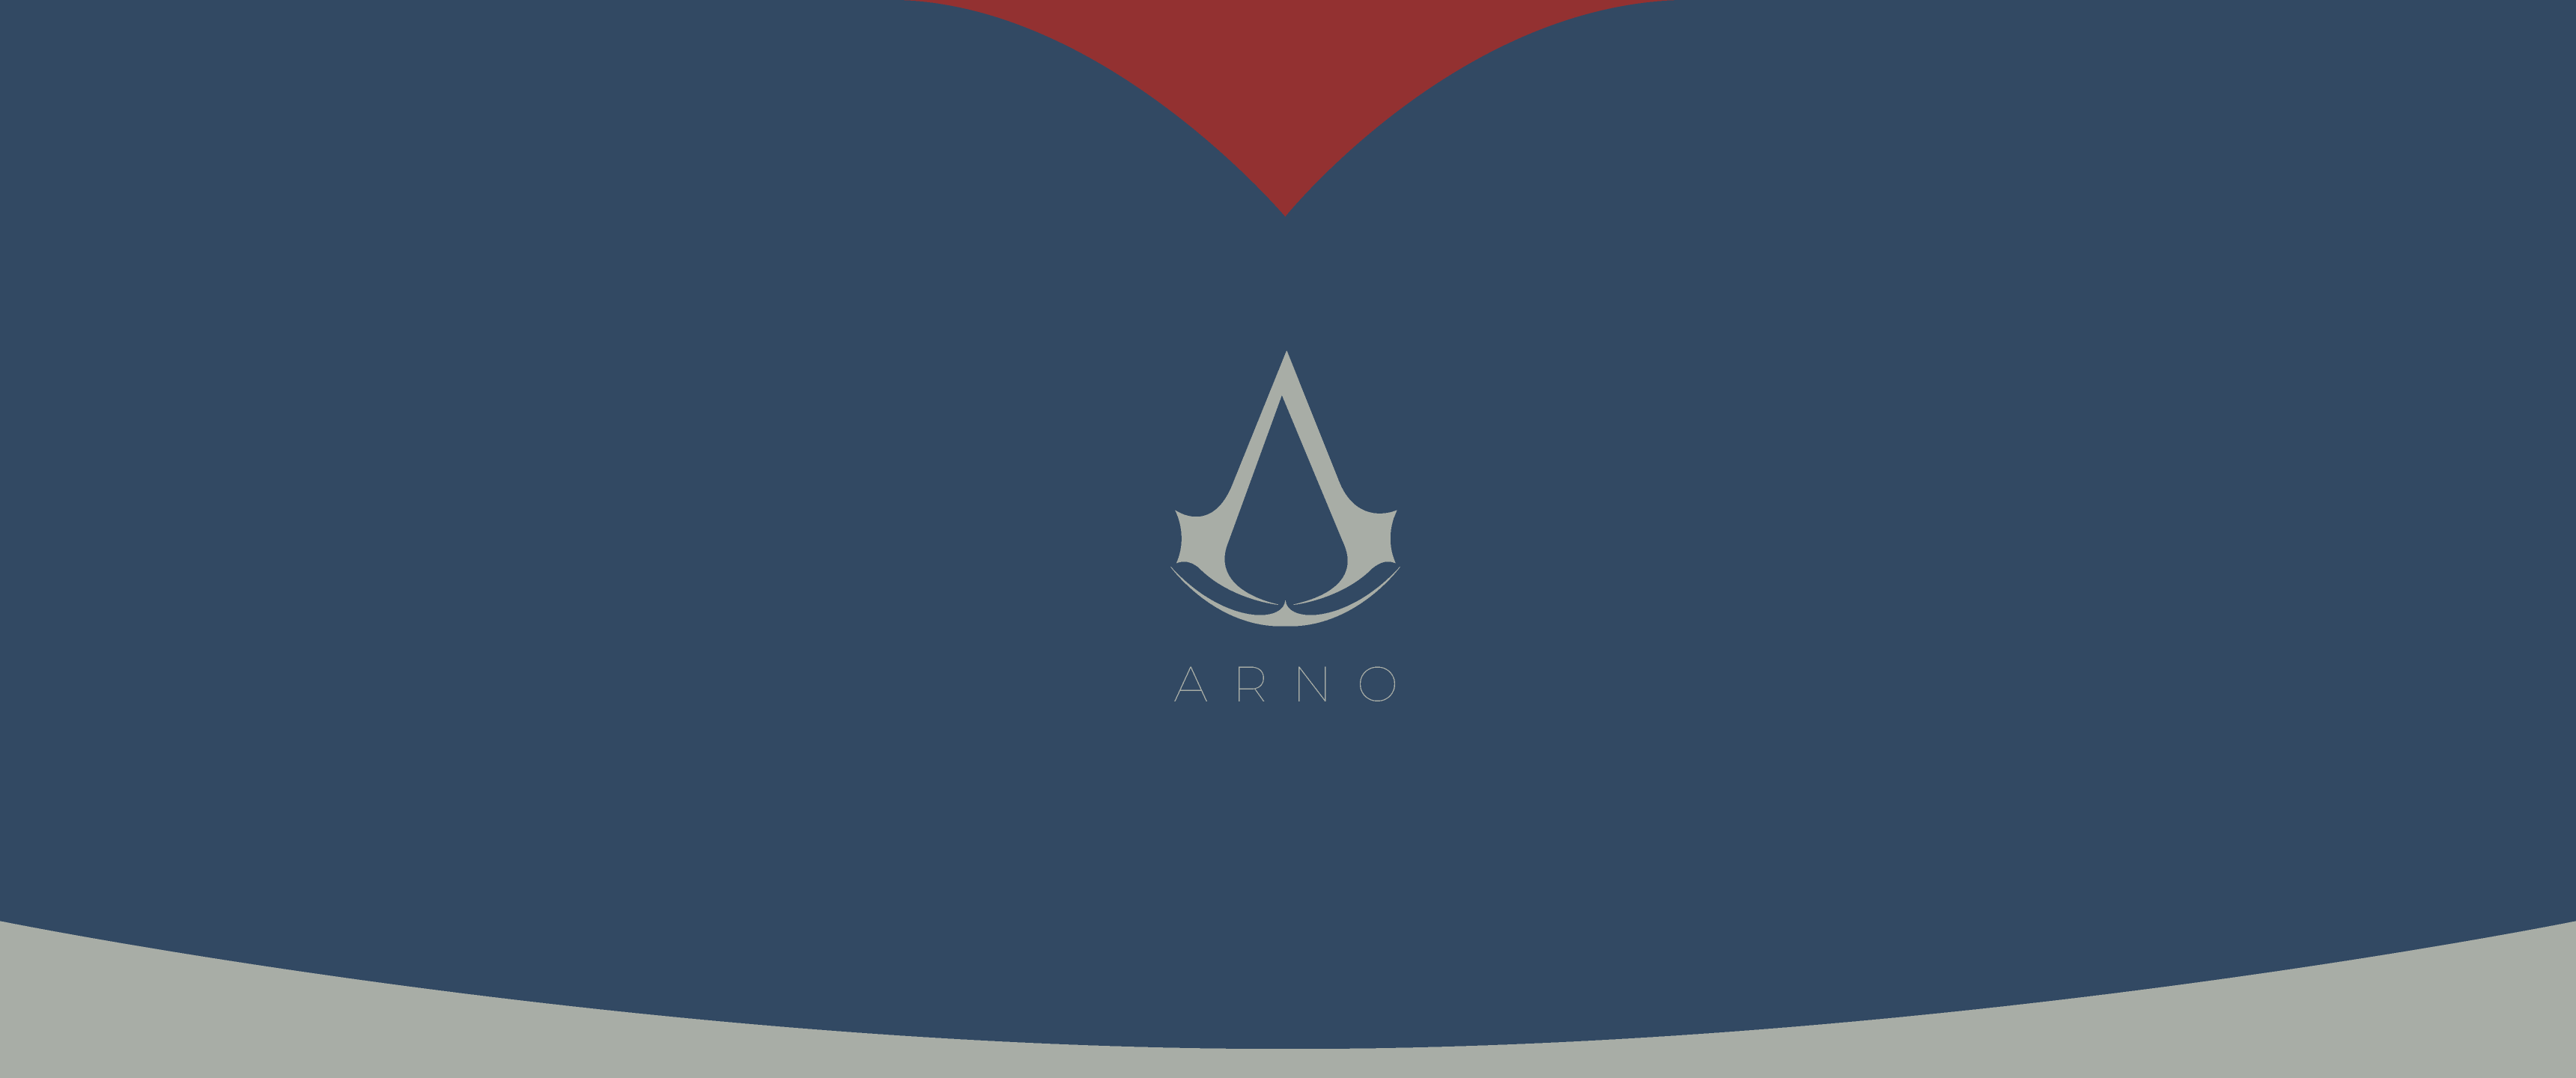 General 3440x1440 Arno Dorian Assassin's Creed video game art simple background digital art watermarked ultrawide video games